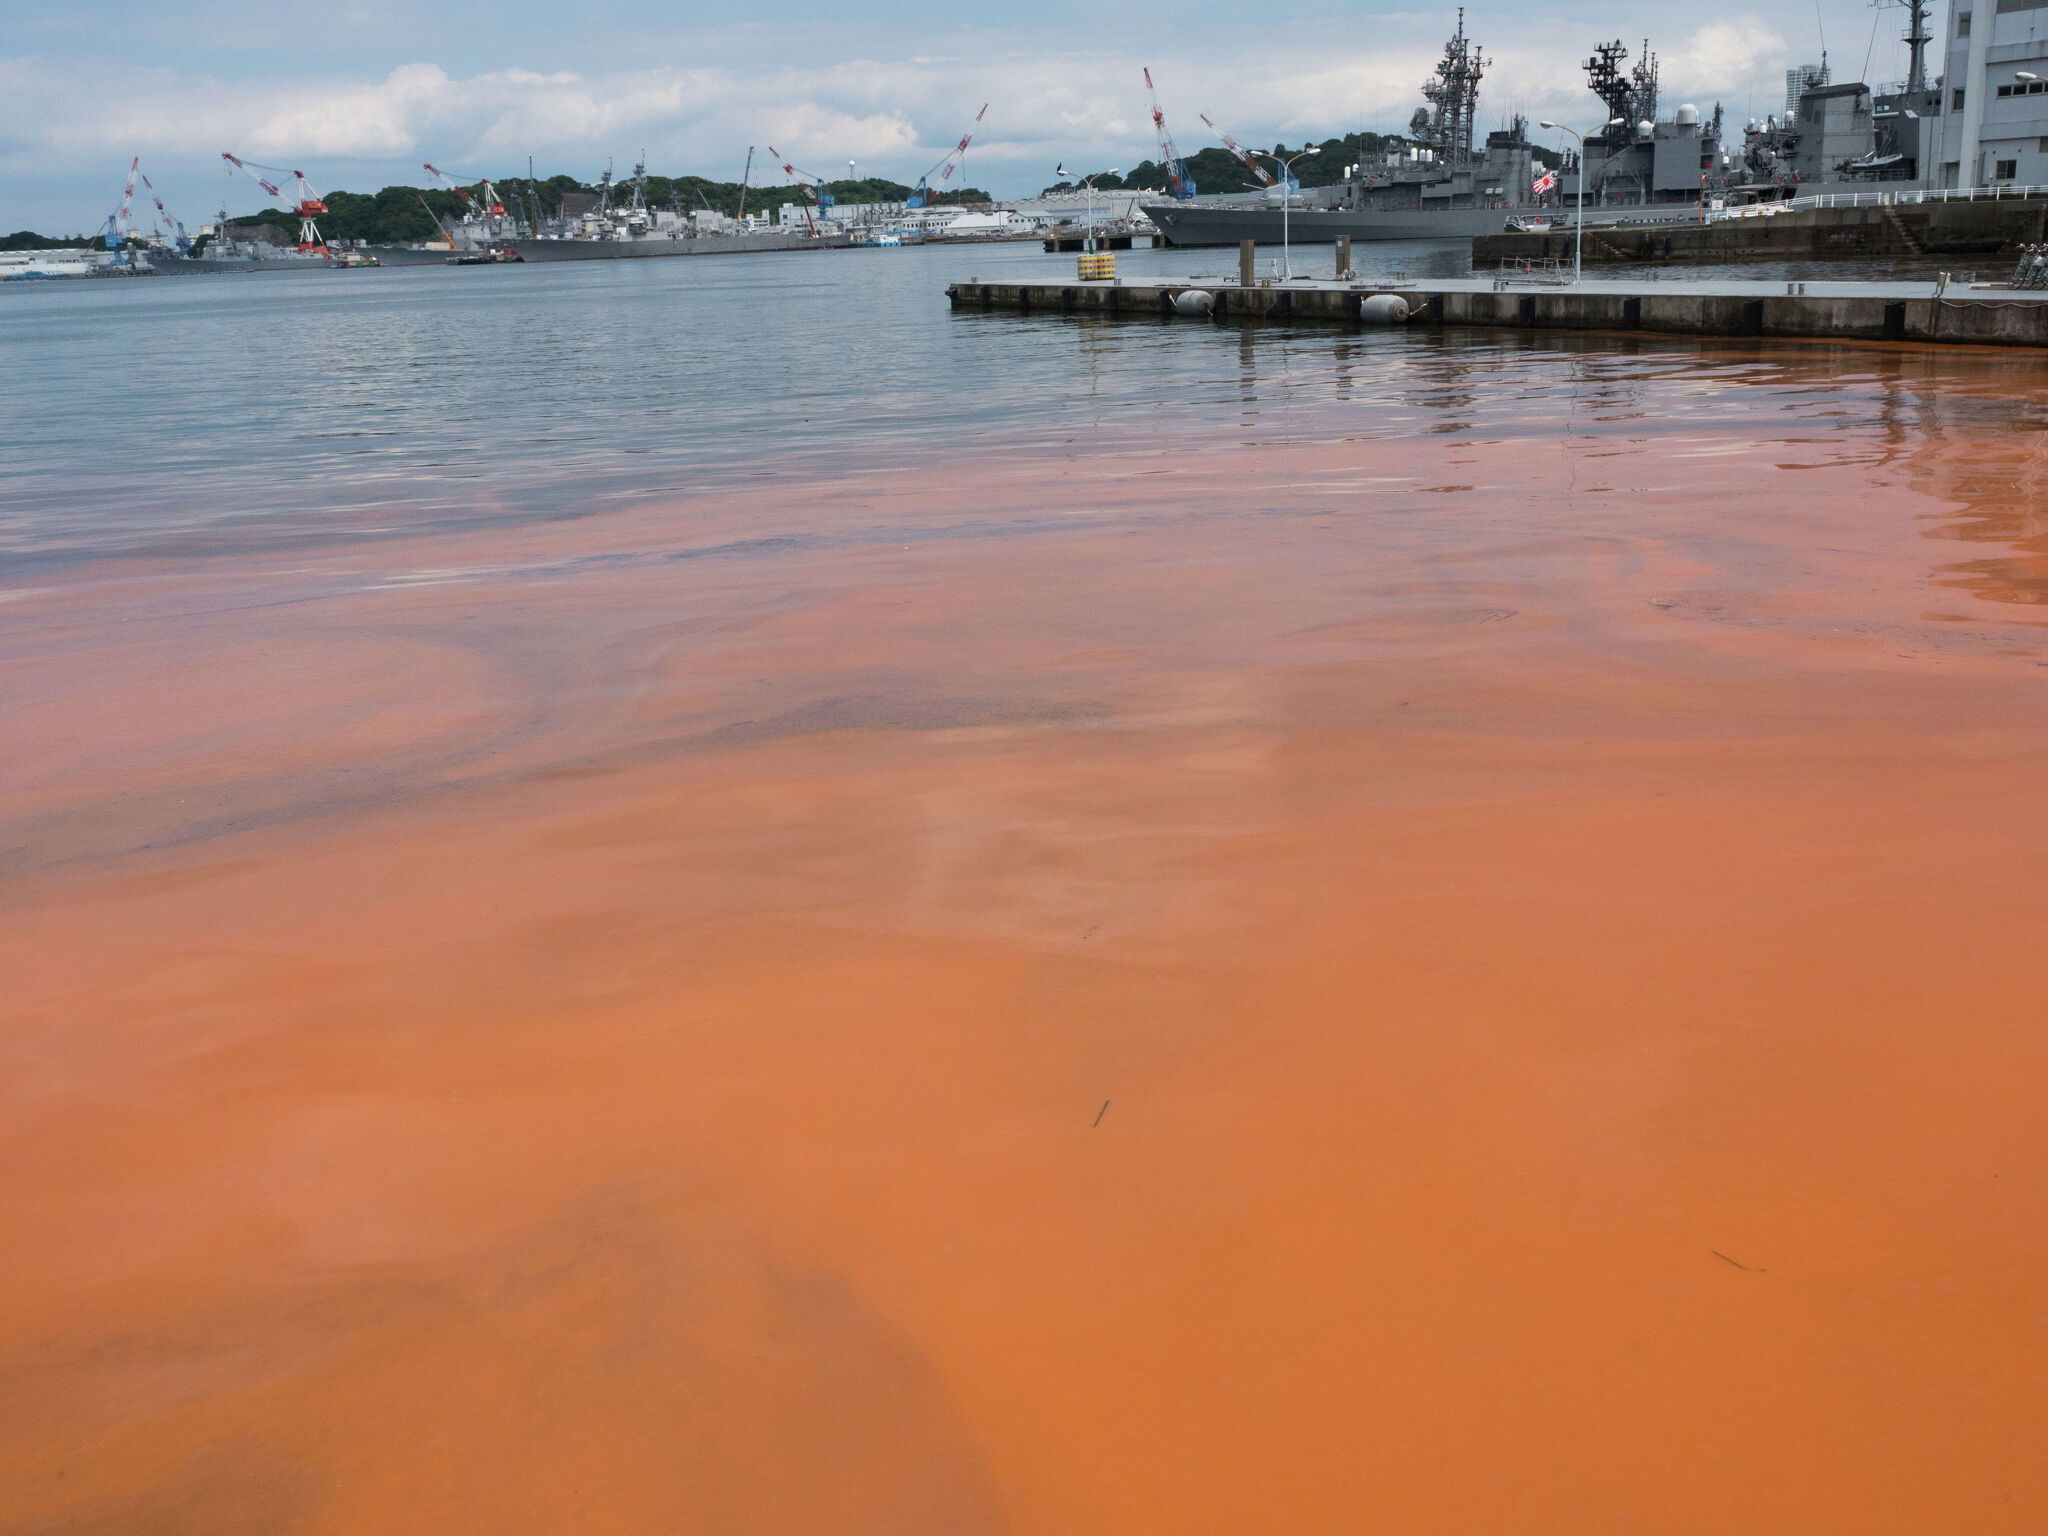 Red tide event along Texas coast confirmed by TPWD